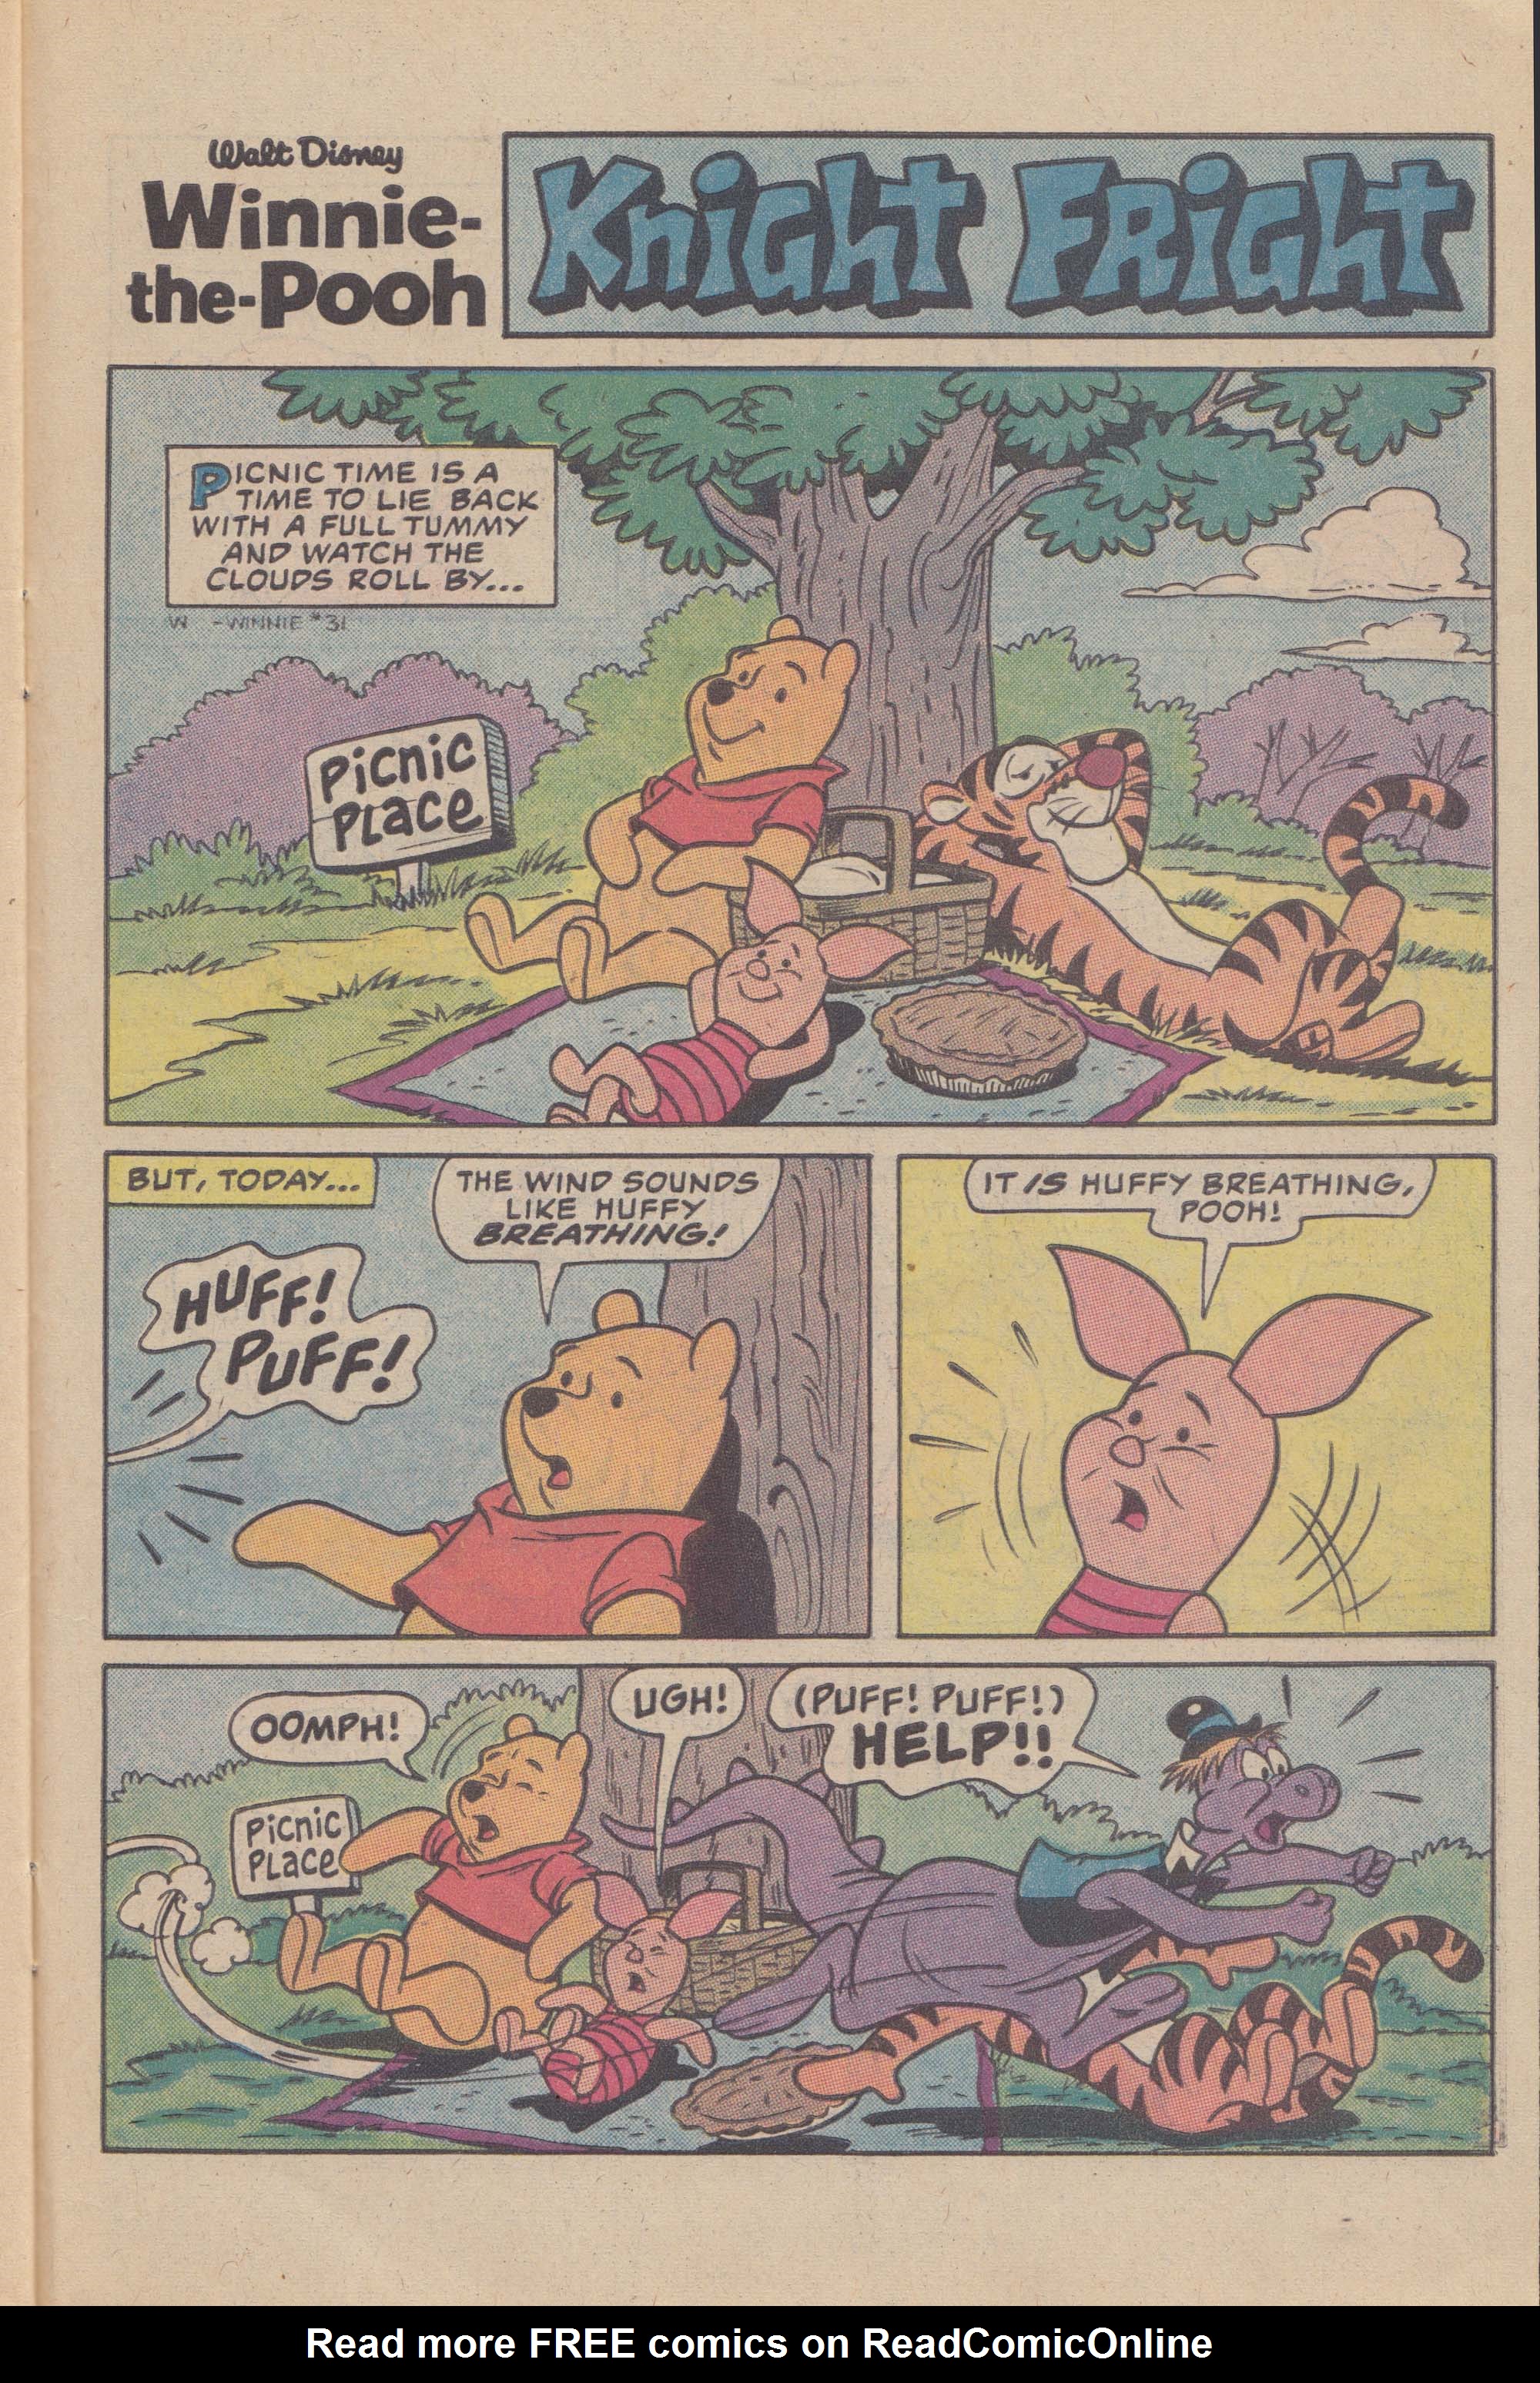 Read online Winnie-the-Pooh comic -  Issue #31 - 27